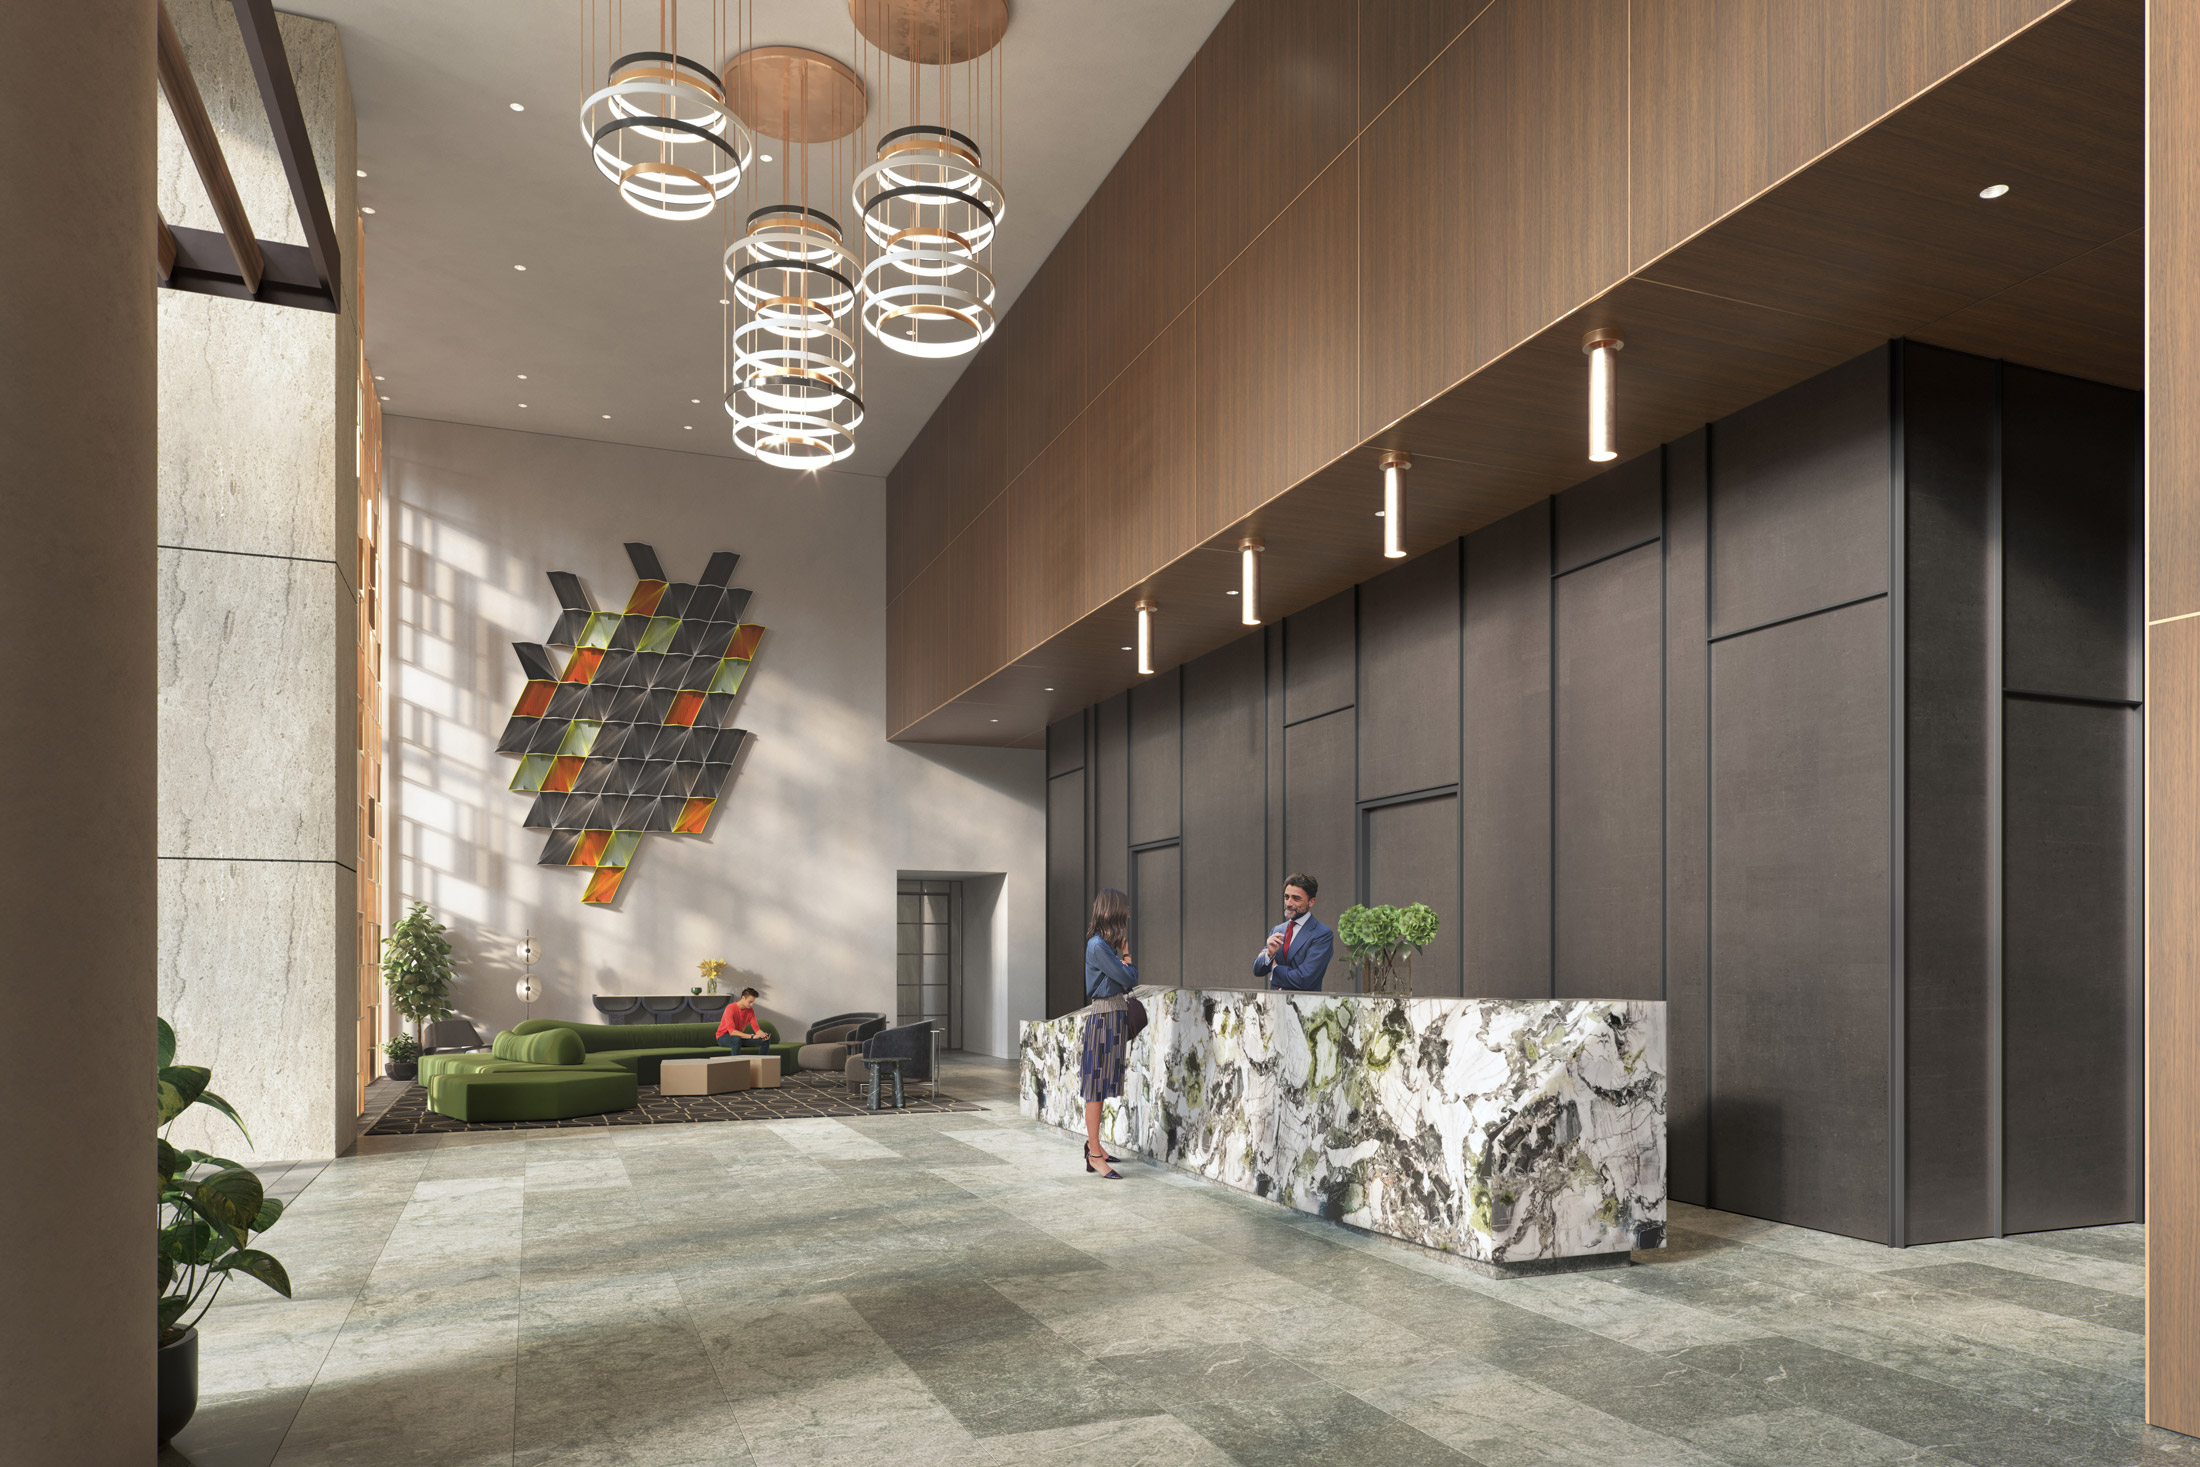 Architectural Rendering of the lobby of the Fifteen Fifty project located in San Francisco, California